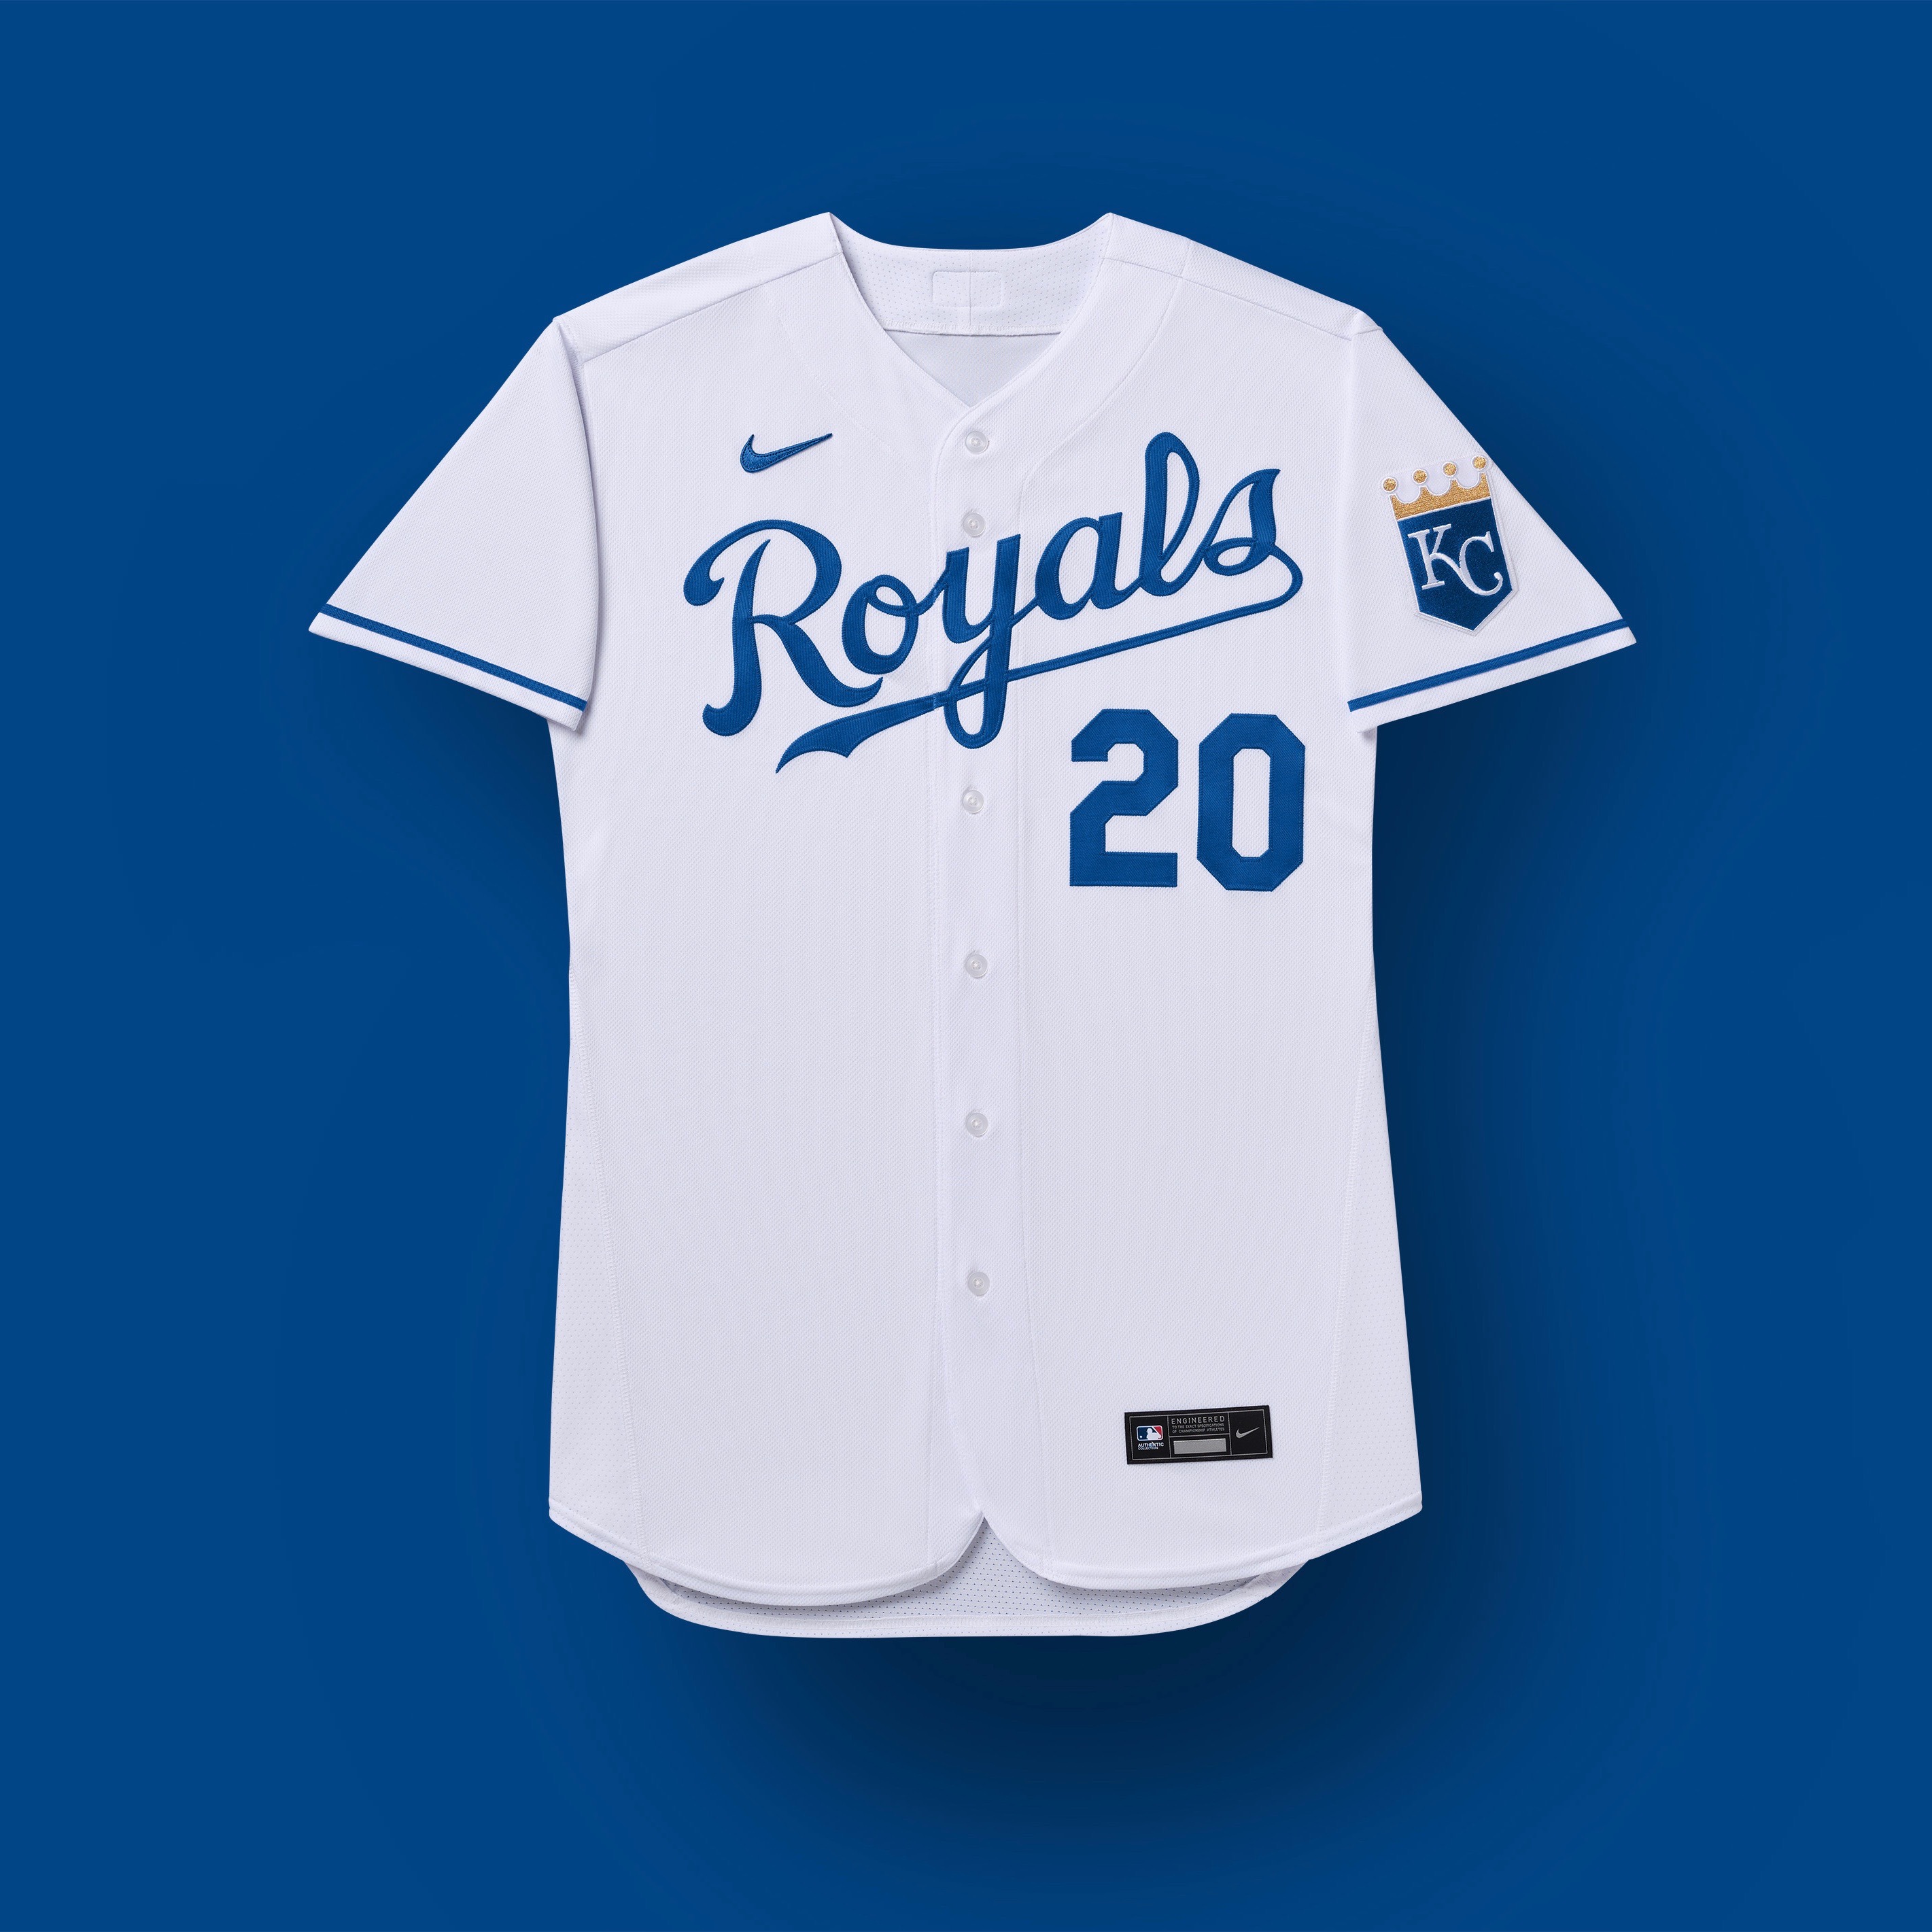 royals jersey numbers 2020